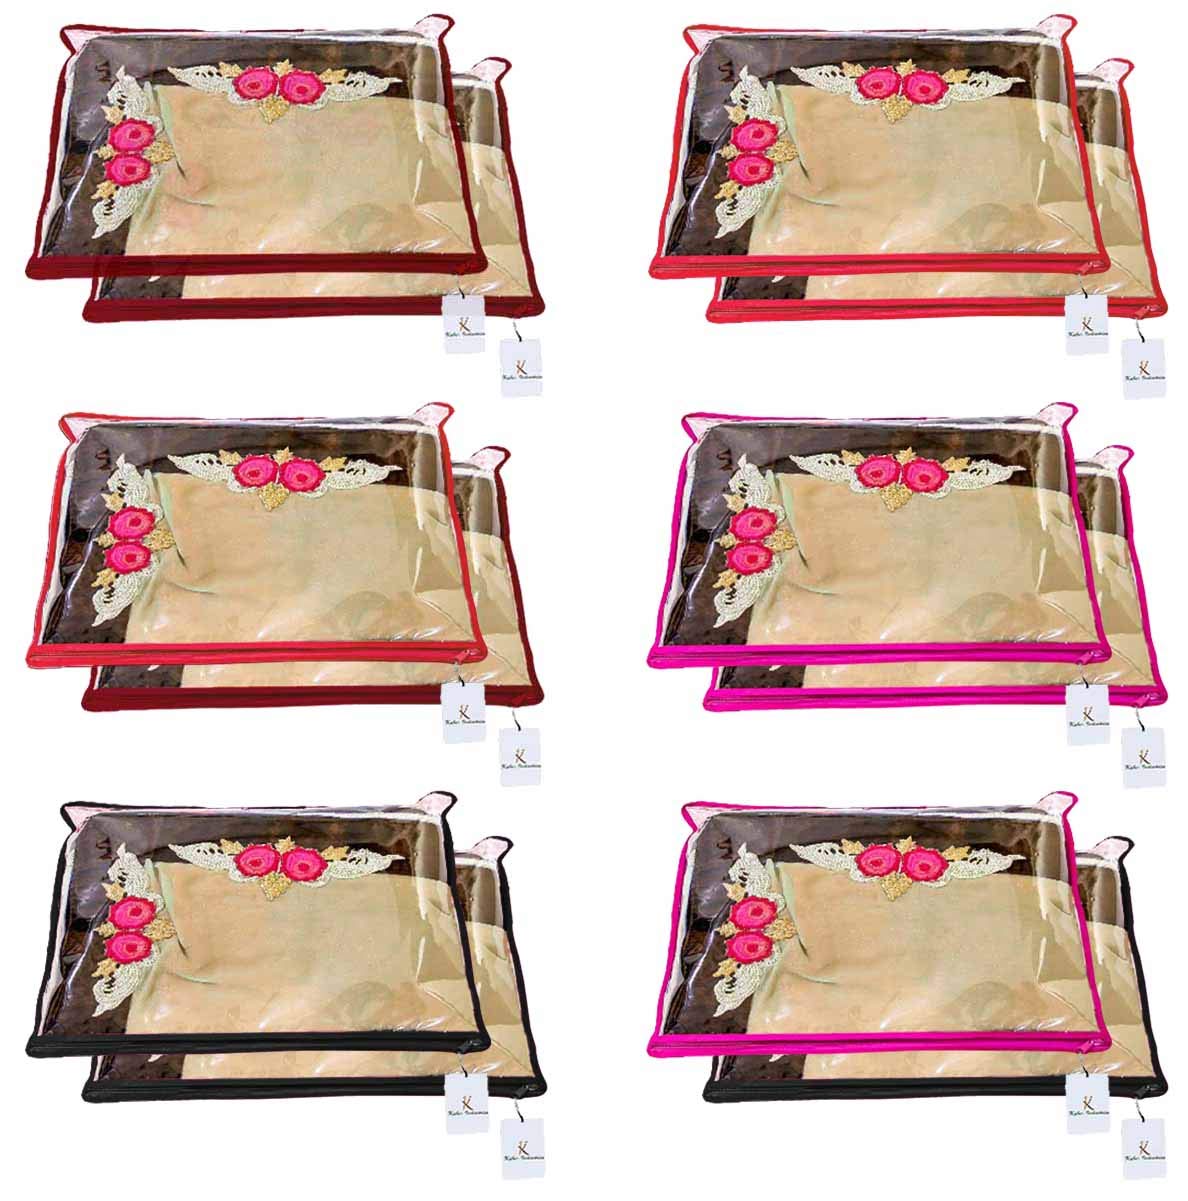 Kuber Industries Non Woven Single Packing Saree Cover 12 pcs Set (Multi) ,CTKNEW120